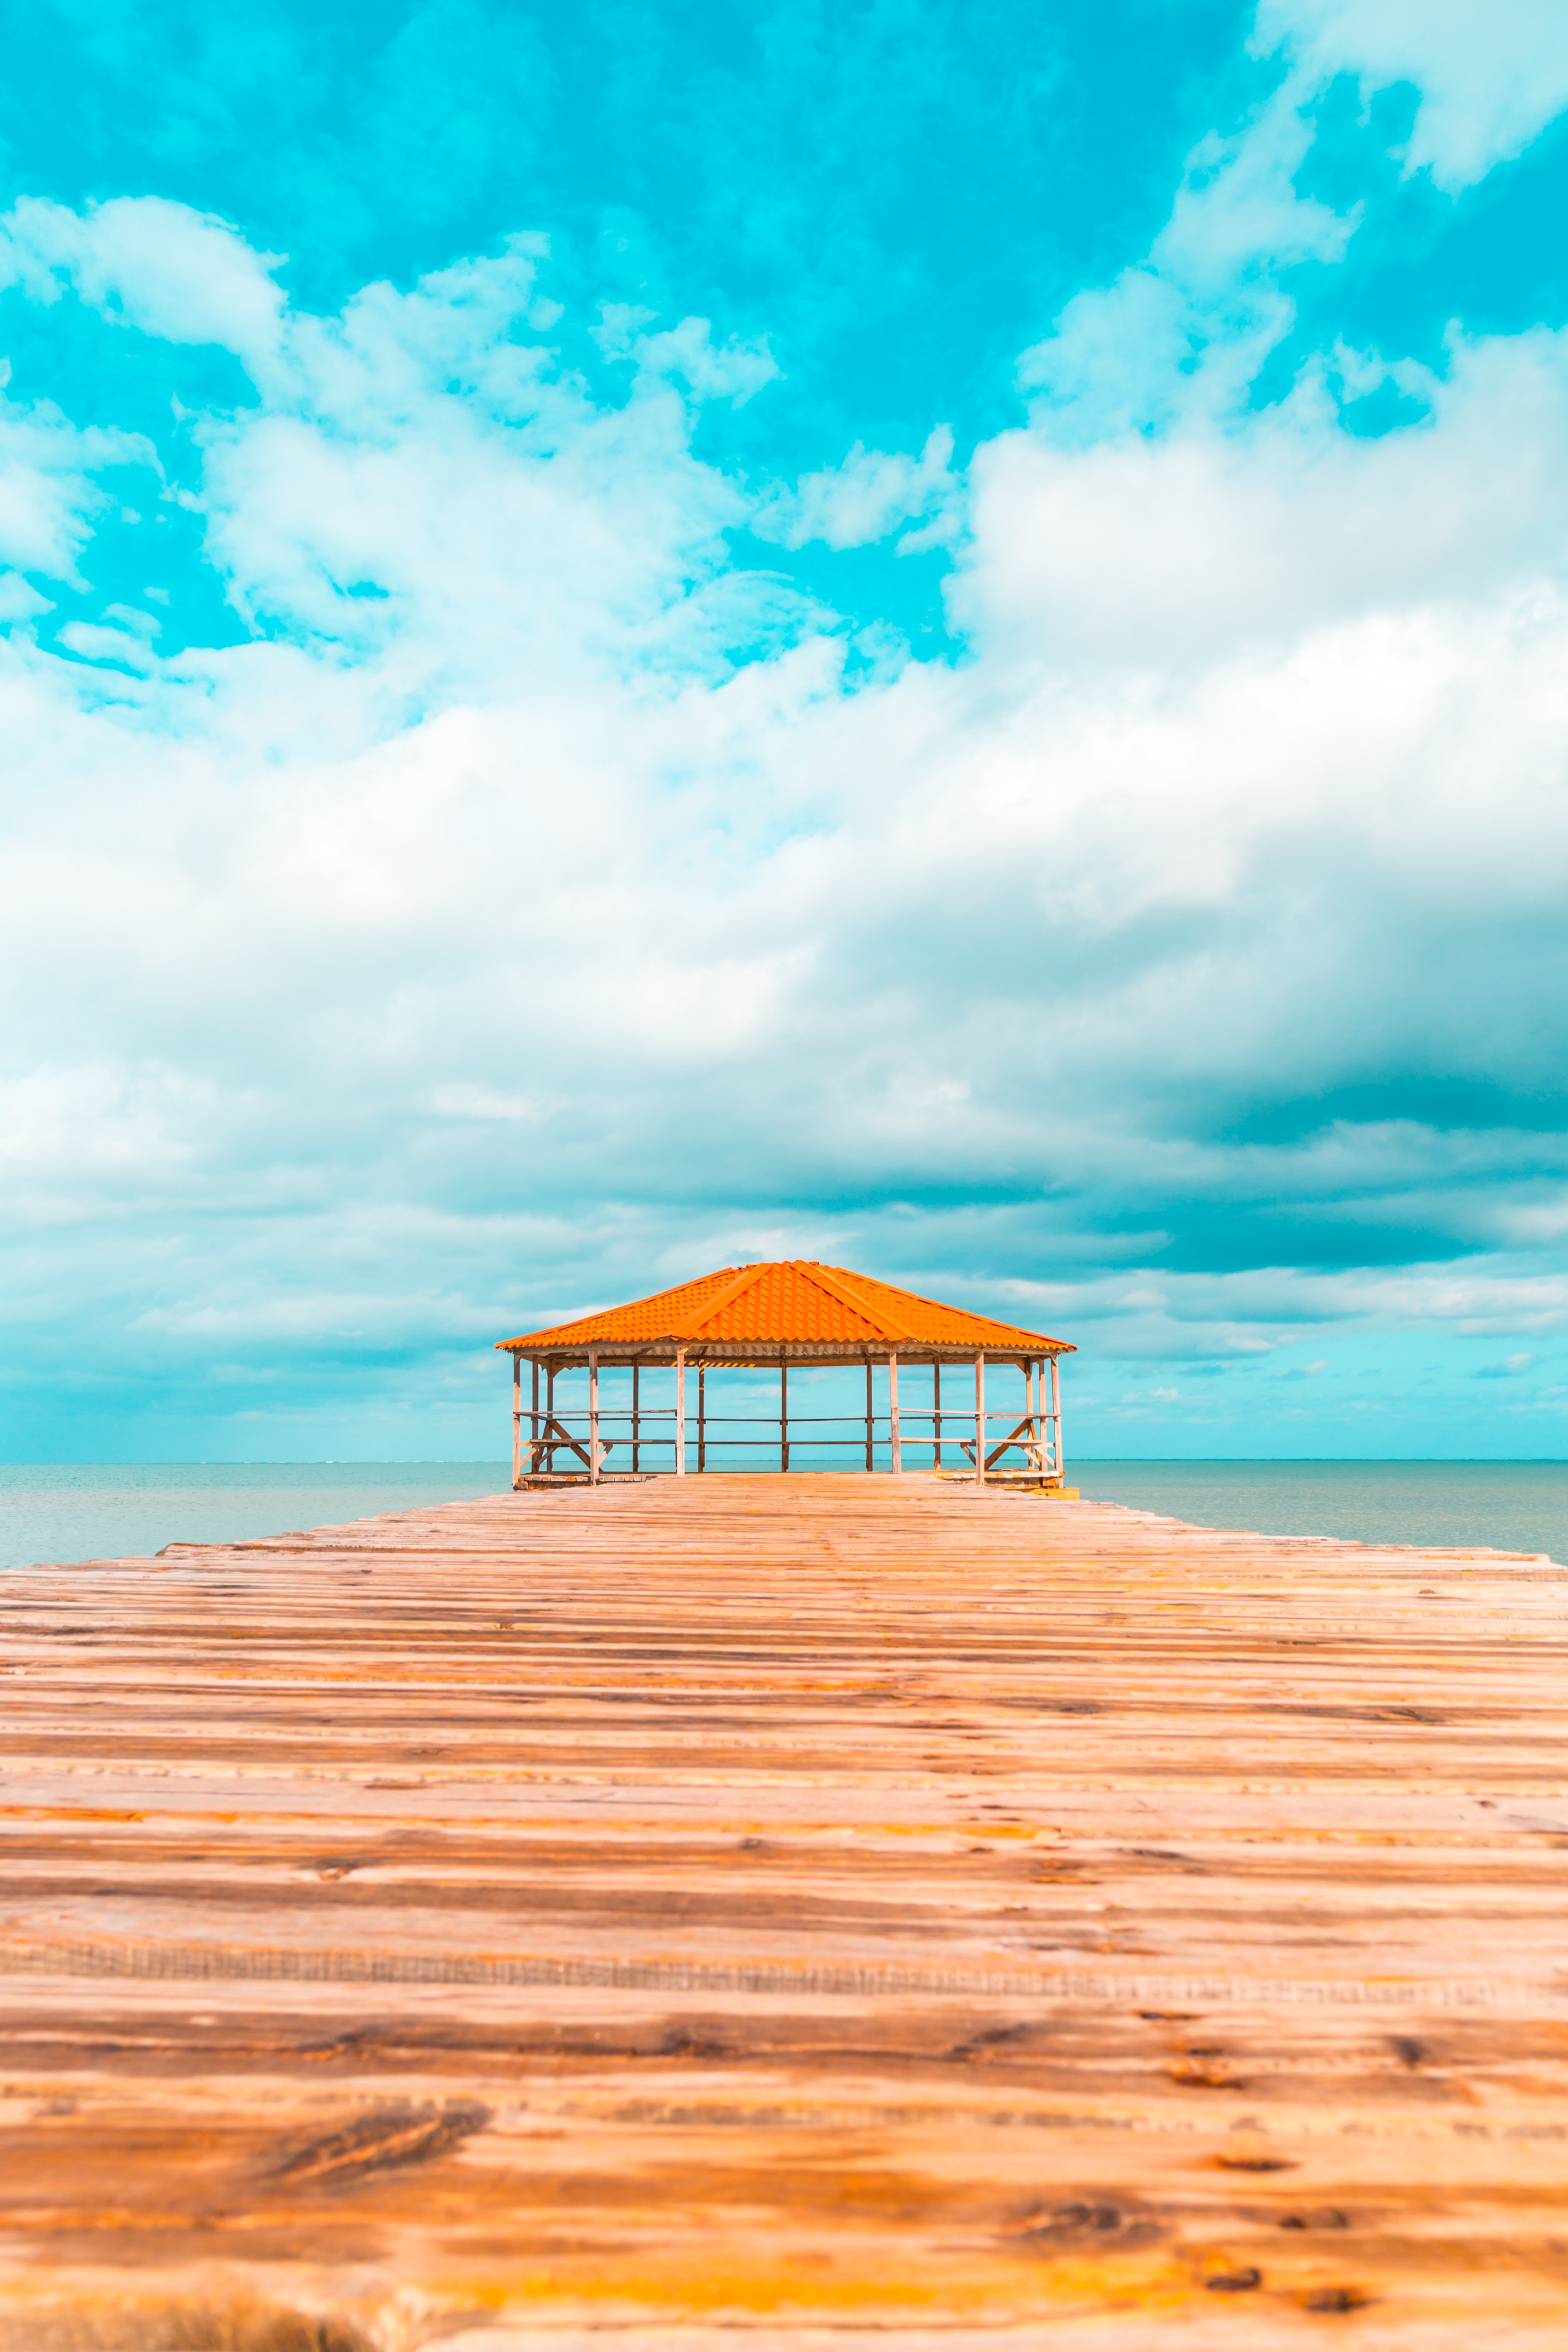 Pier bower, nature, relaxation, clouds 8k Backgrounds